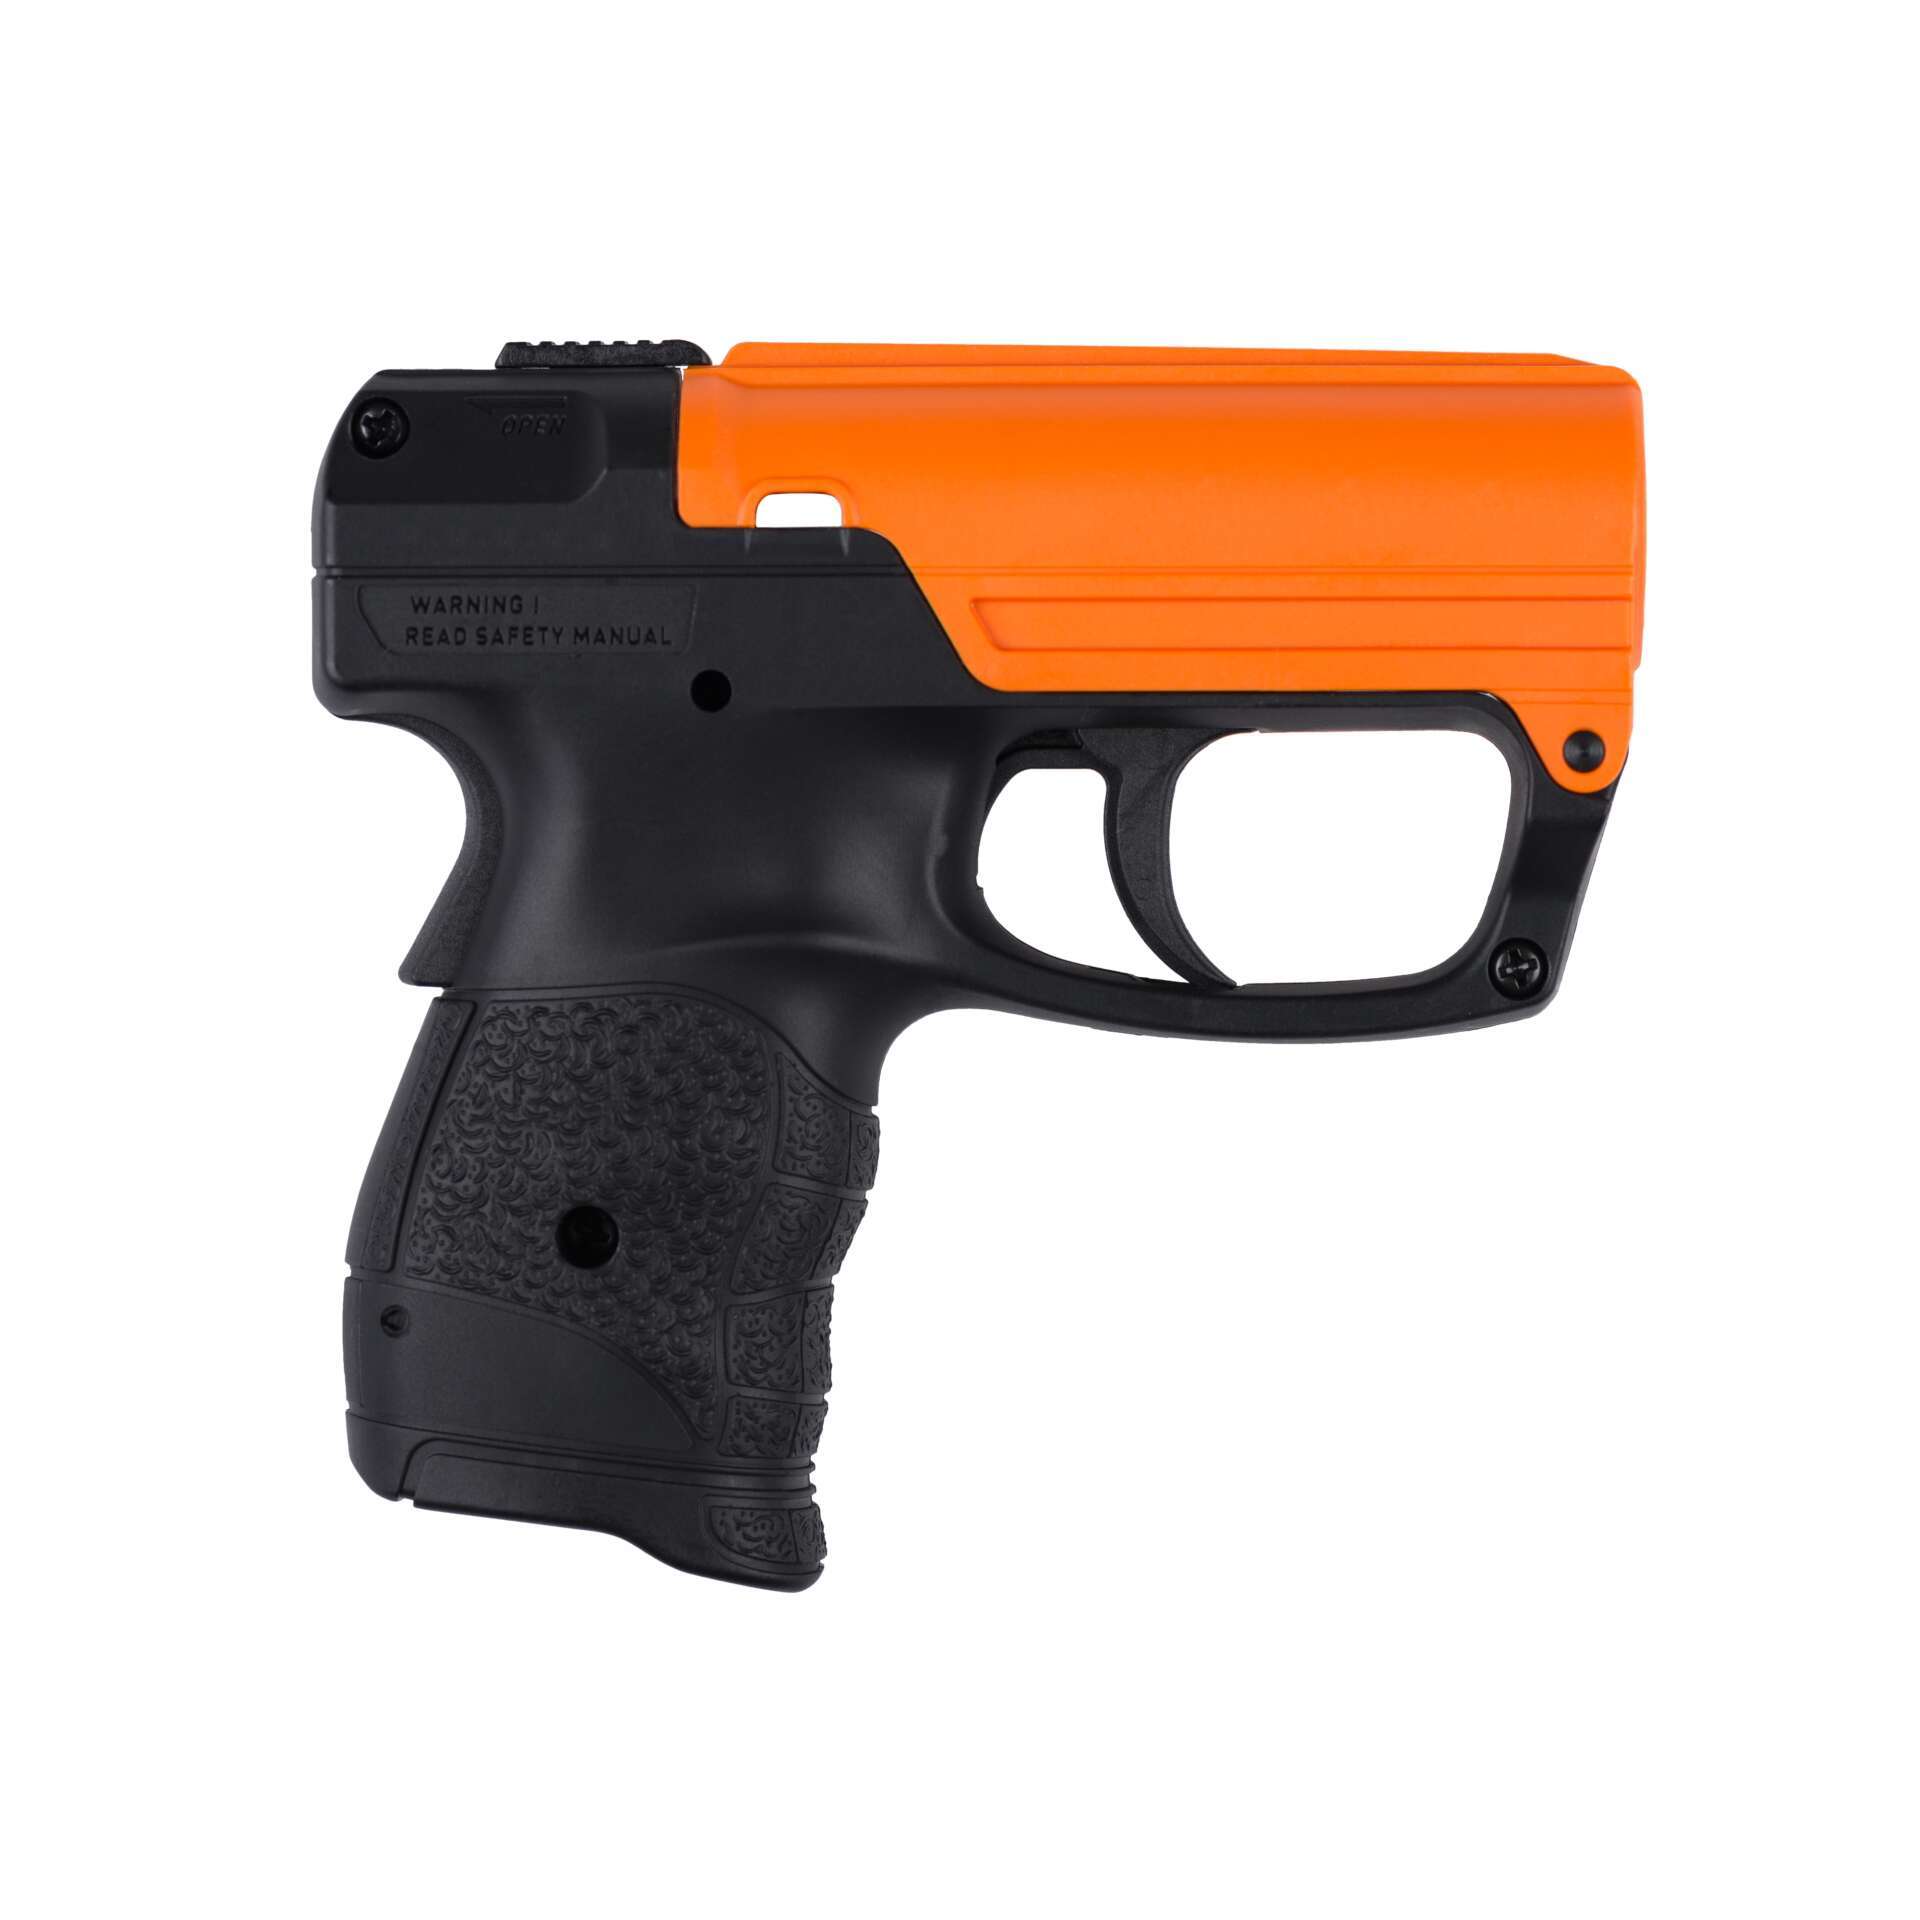 SABRE Aim and Fire Pepper Gel with Trigger and Grip Deployment System